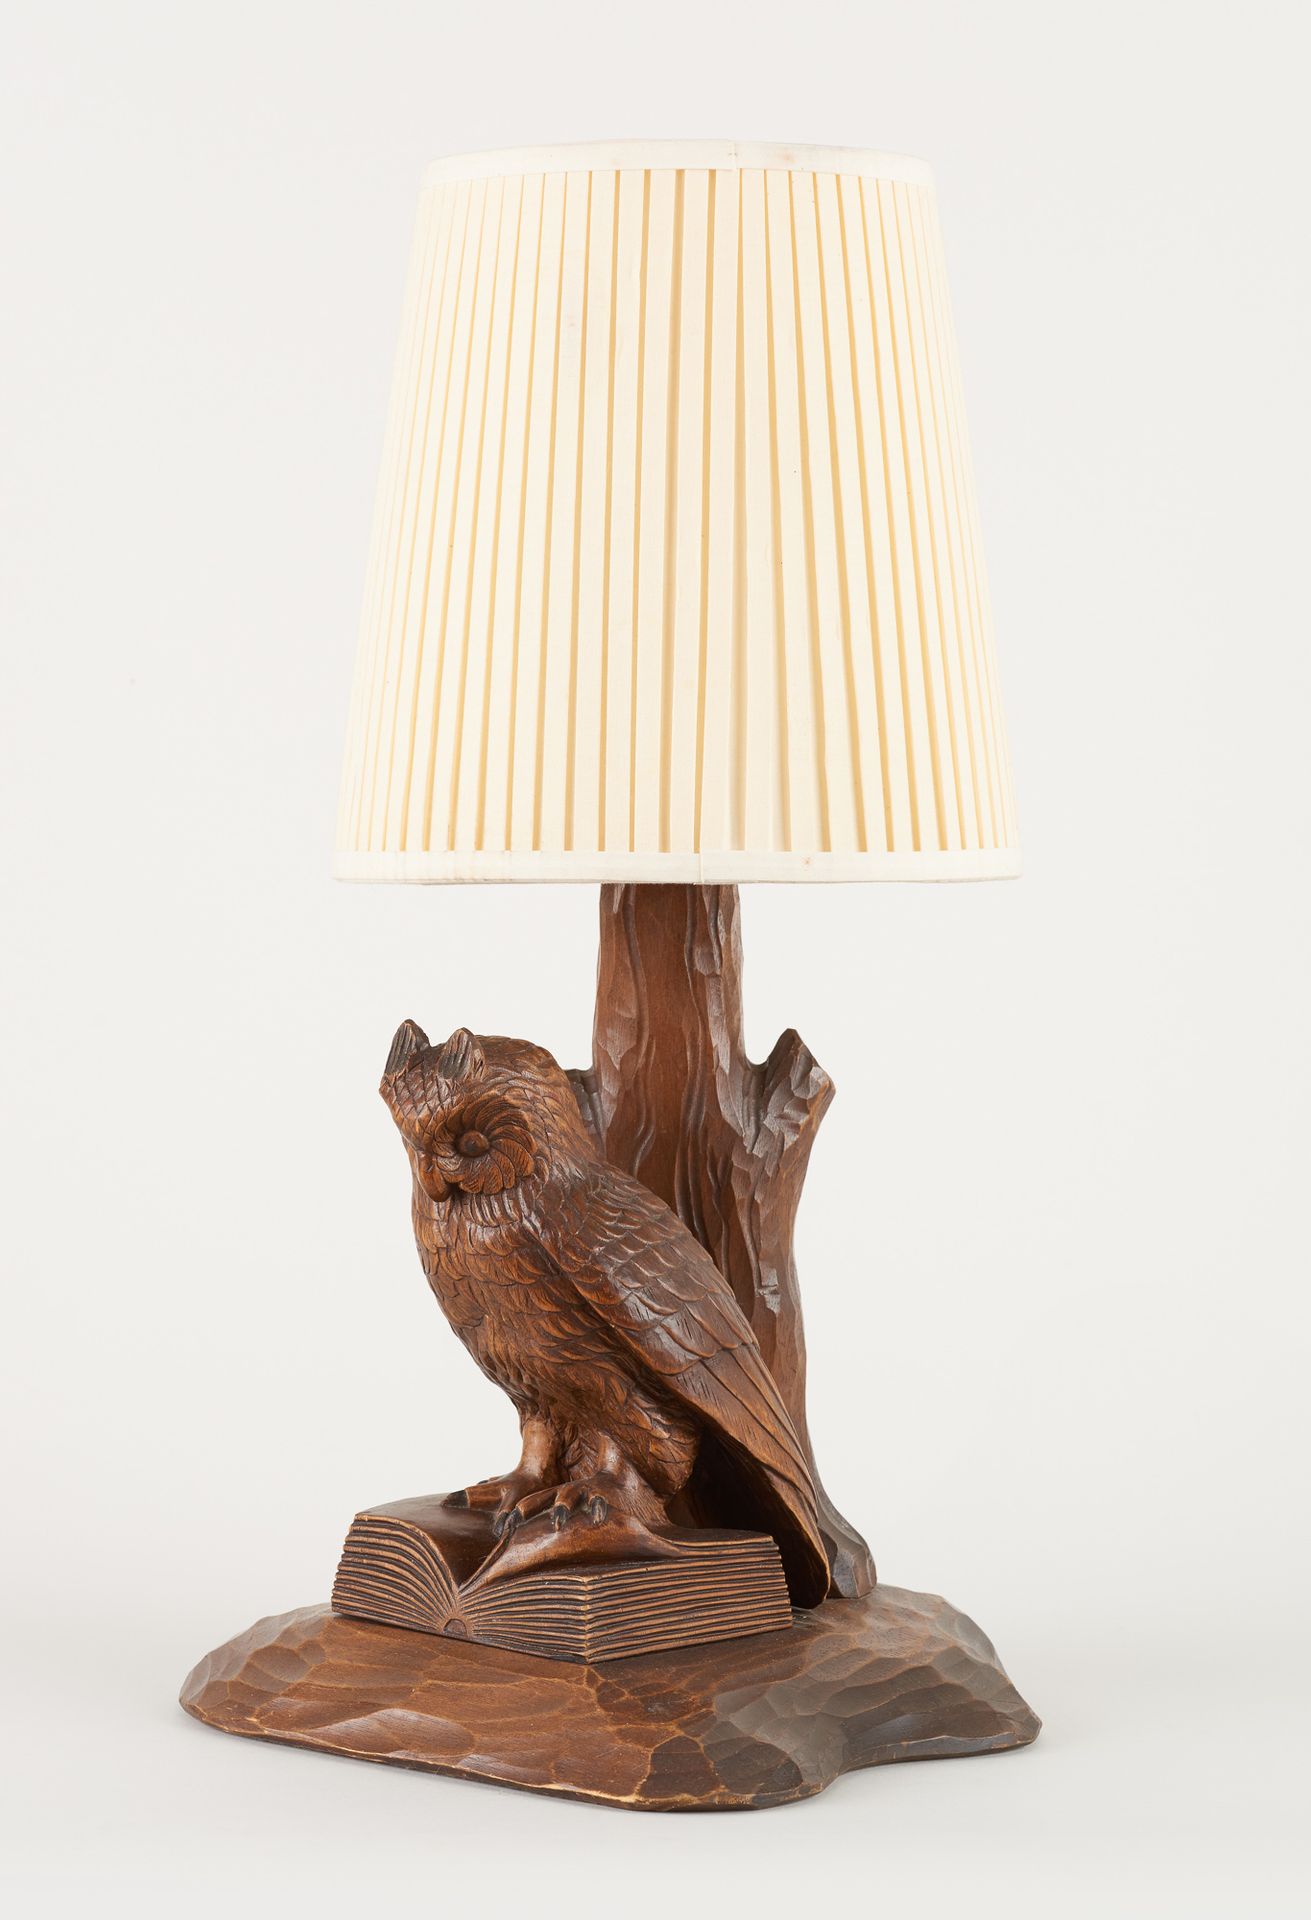 Travail de la Forêt Noire 20e. Lighting: Table lamp in carved wood representing &hellip;